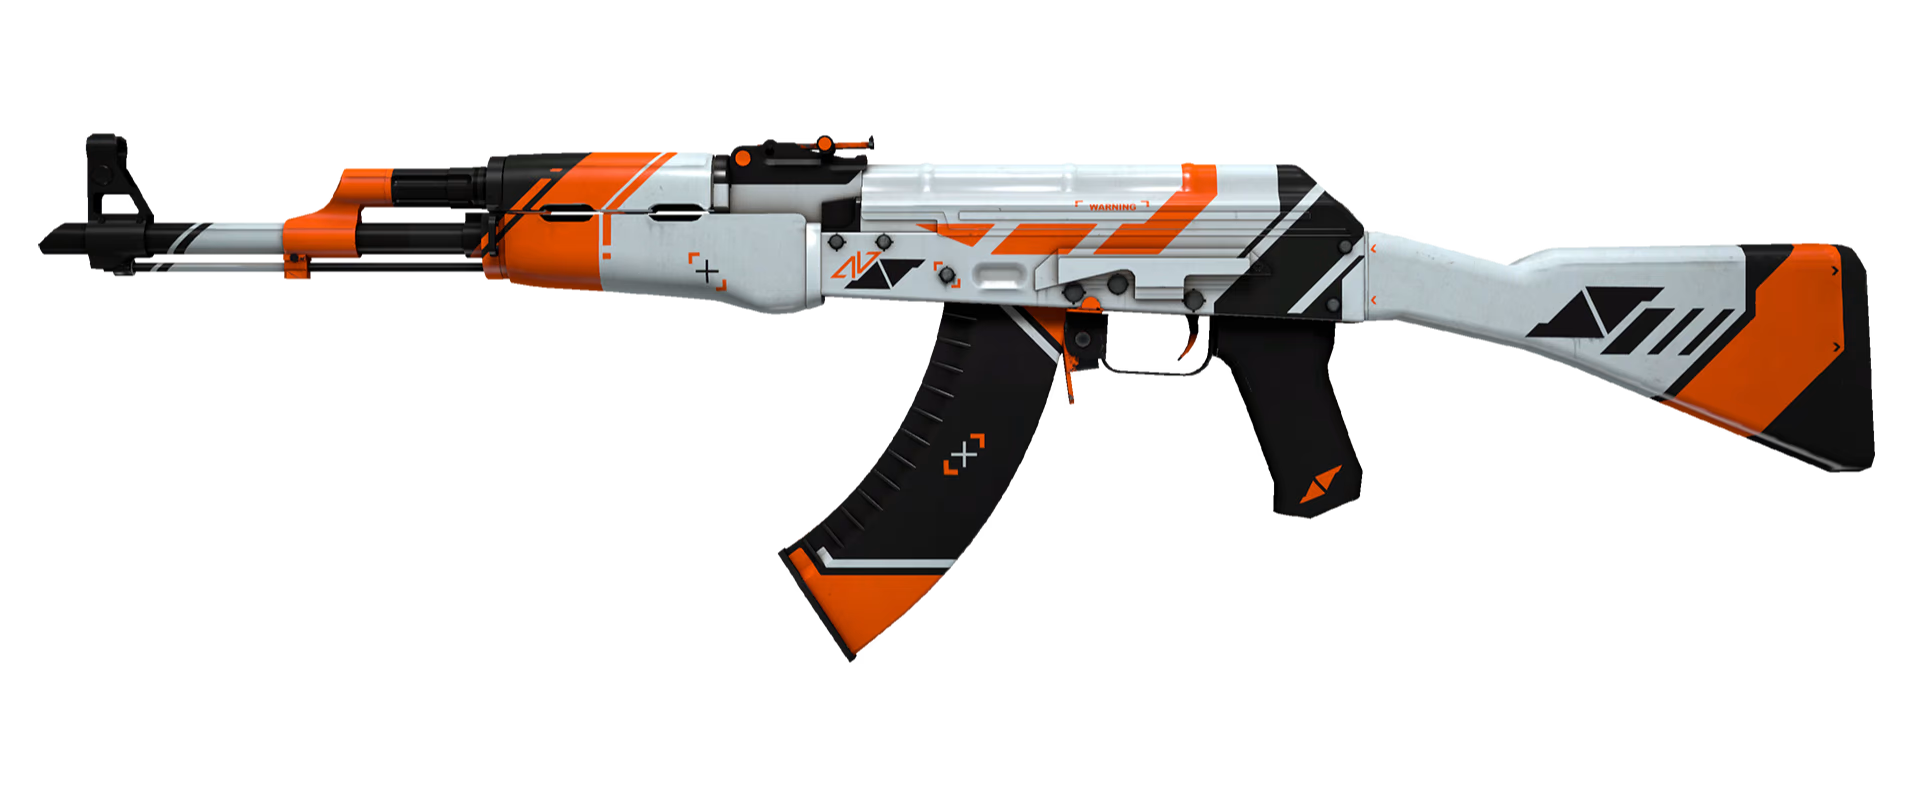 download the new version for ipod Demonic AK47 cs go skin